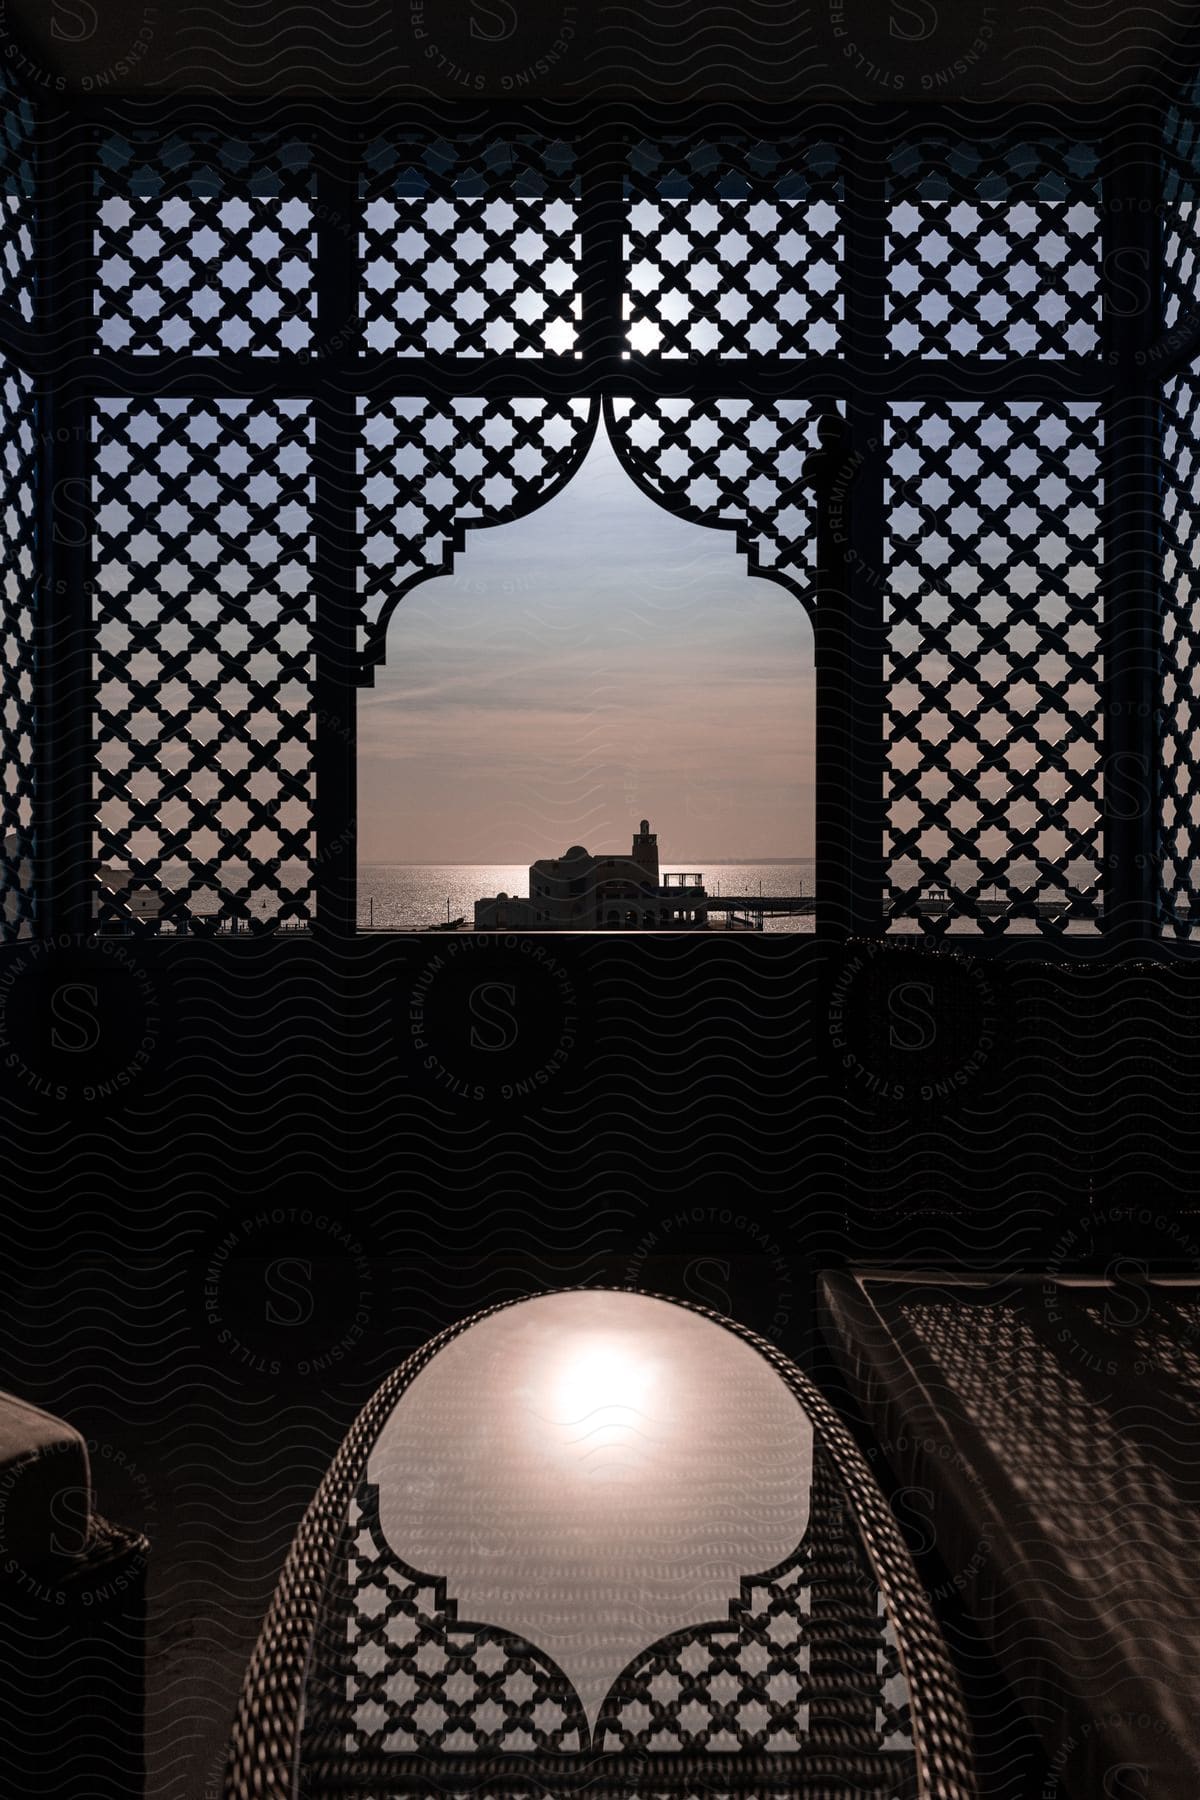 A glass table reflects the ornate latticework of a building in qatar